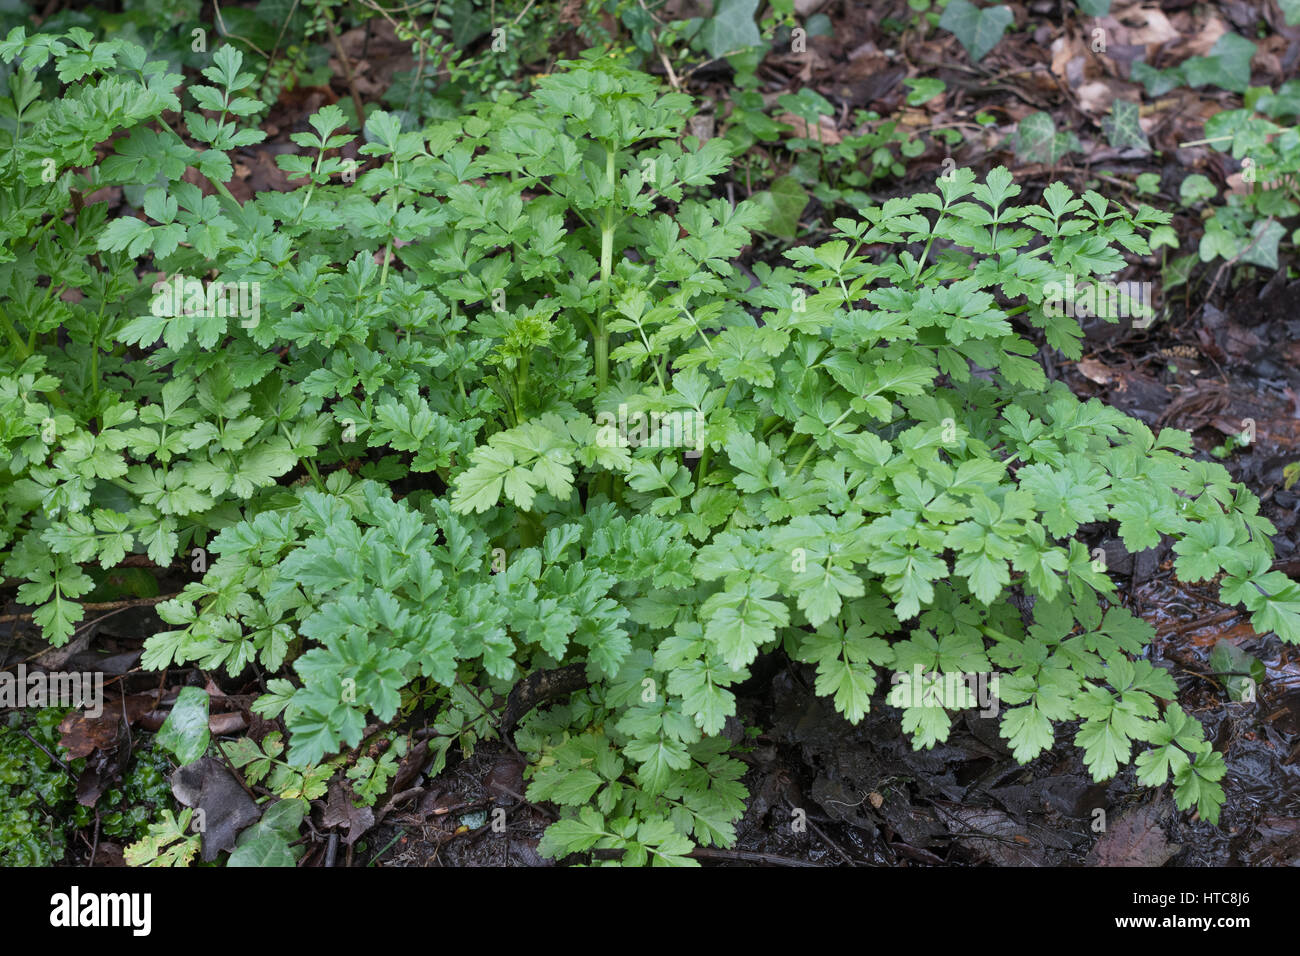 Young springtime shoots / growth of the poisonous Hemlock Water Dropwort / Oenanthe crocata. One of UK's most poisonous plants. Stock Photo